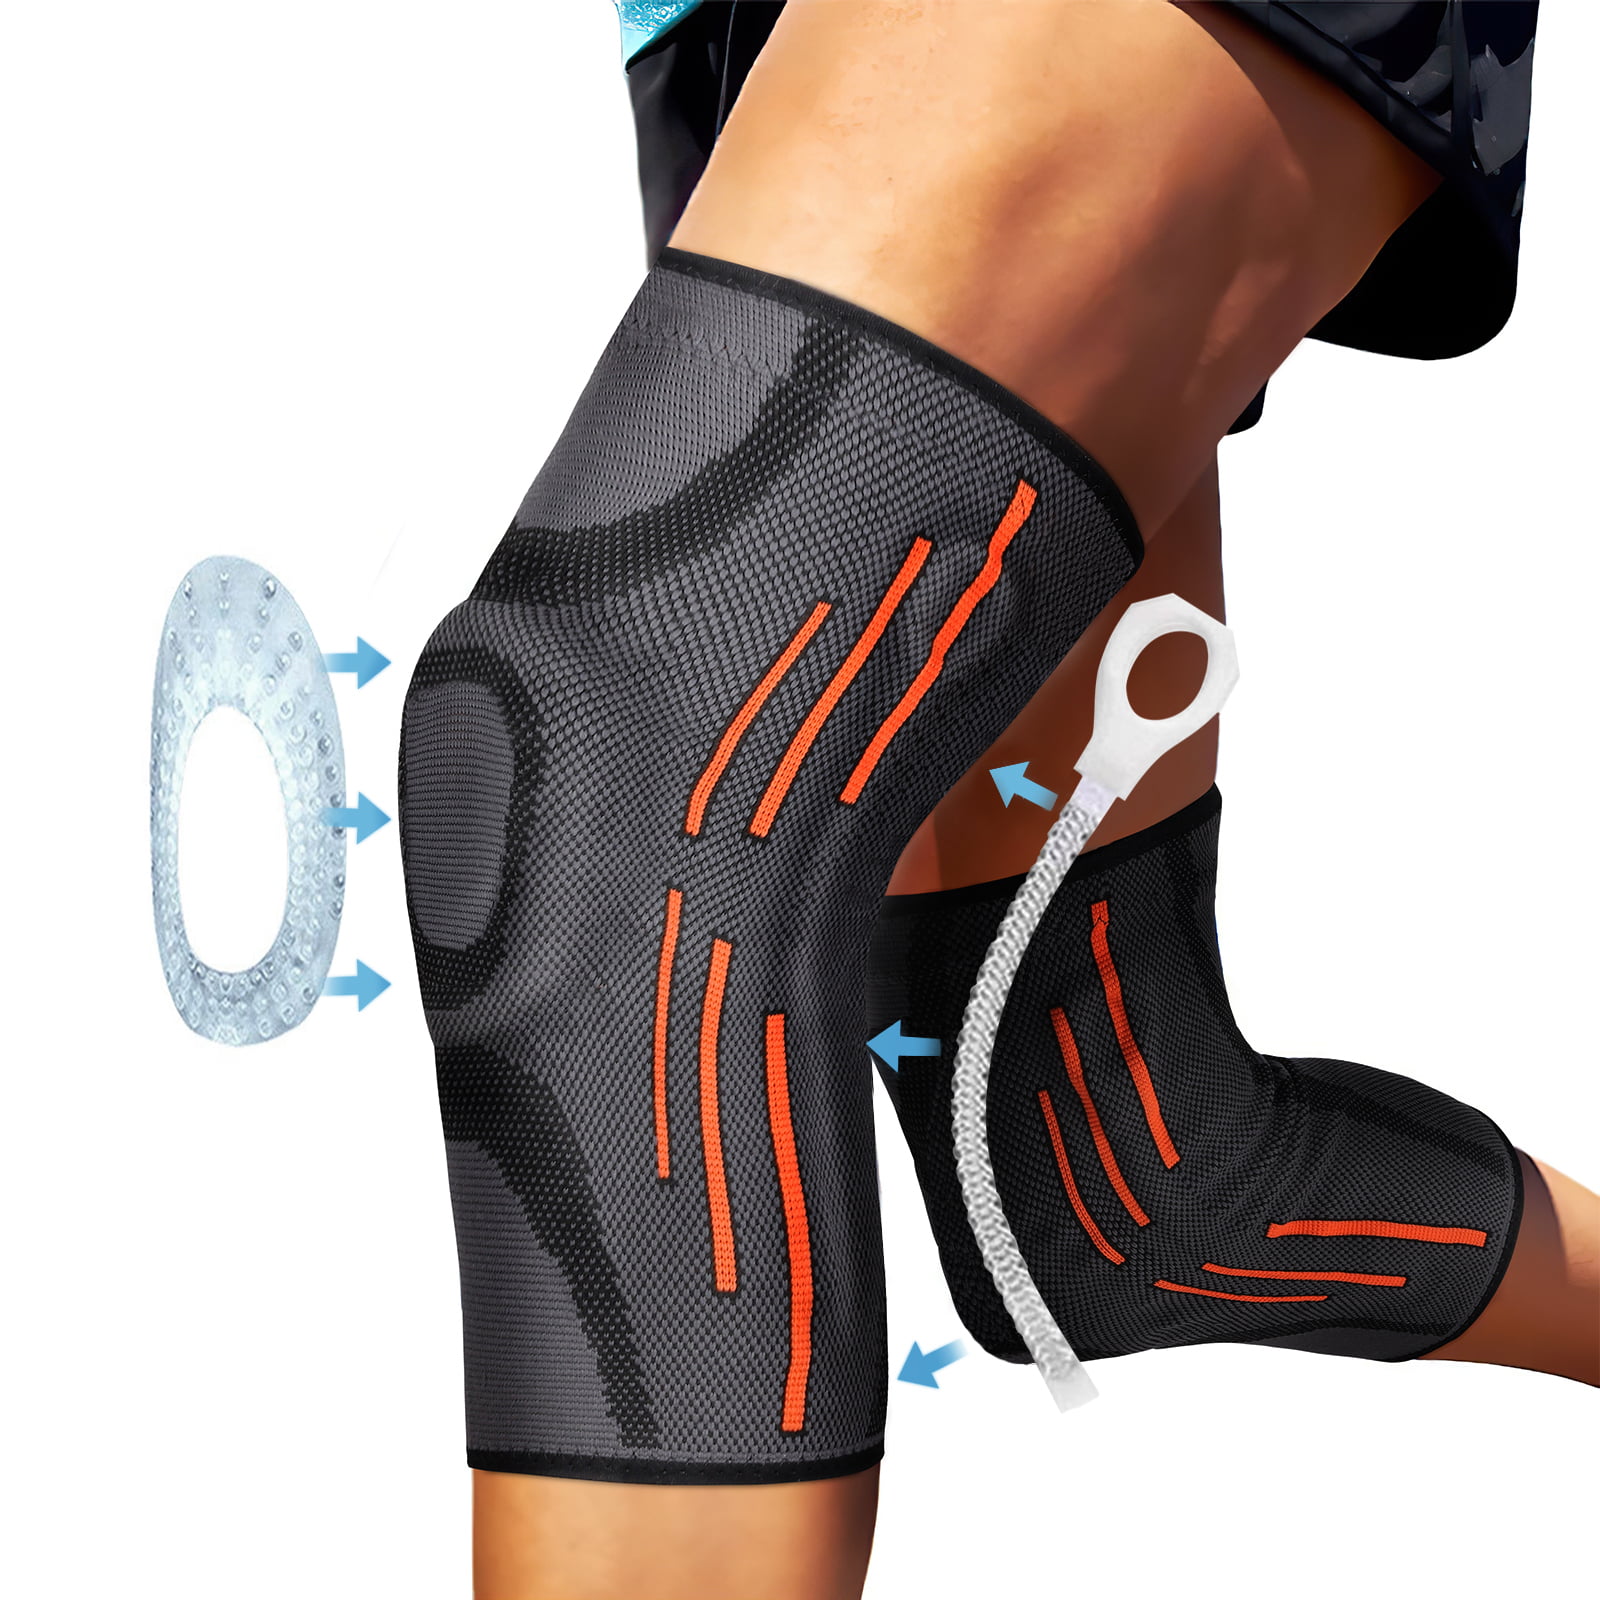 Details about   Football Shin Guards Protective Soccer Pads Leg Basketball Training Mens 1pc 